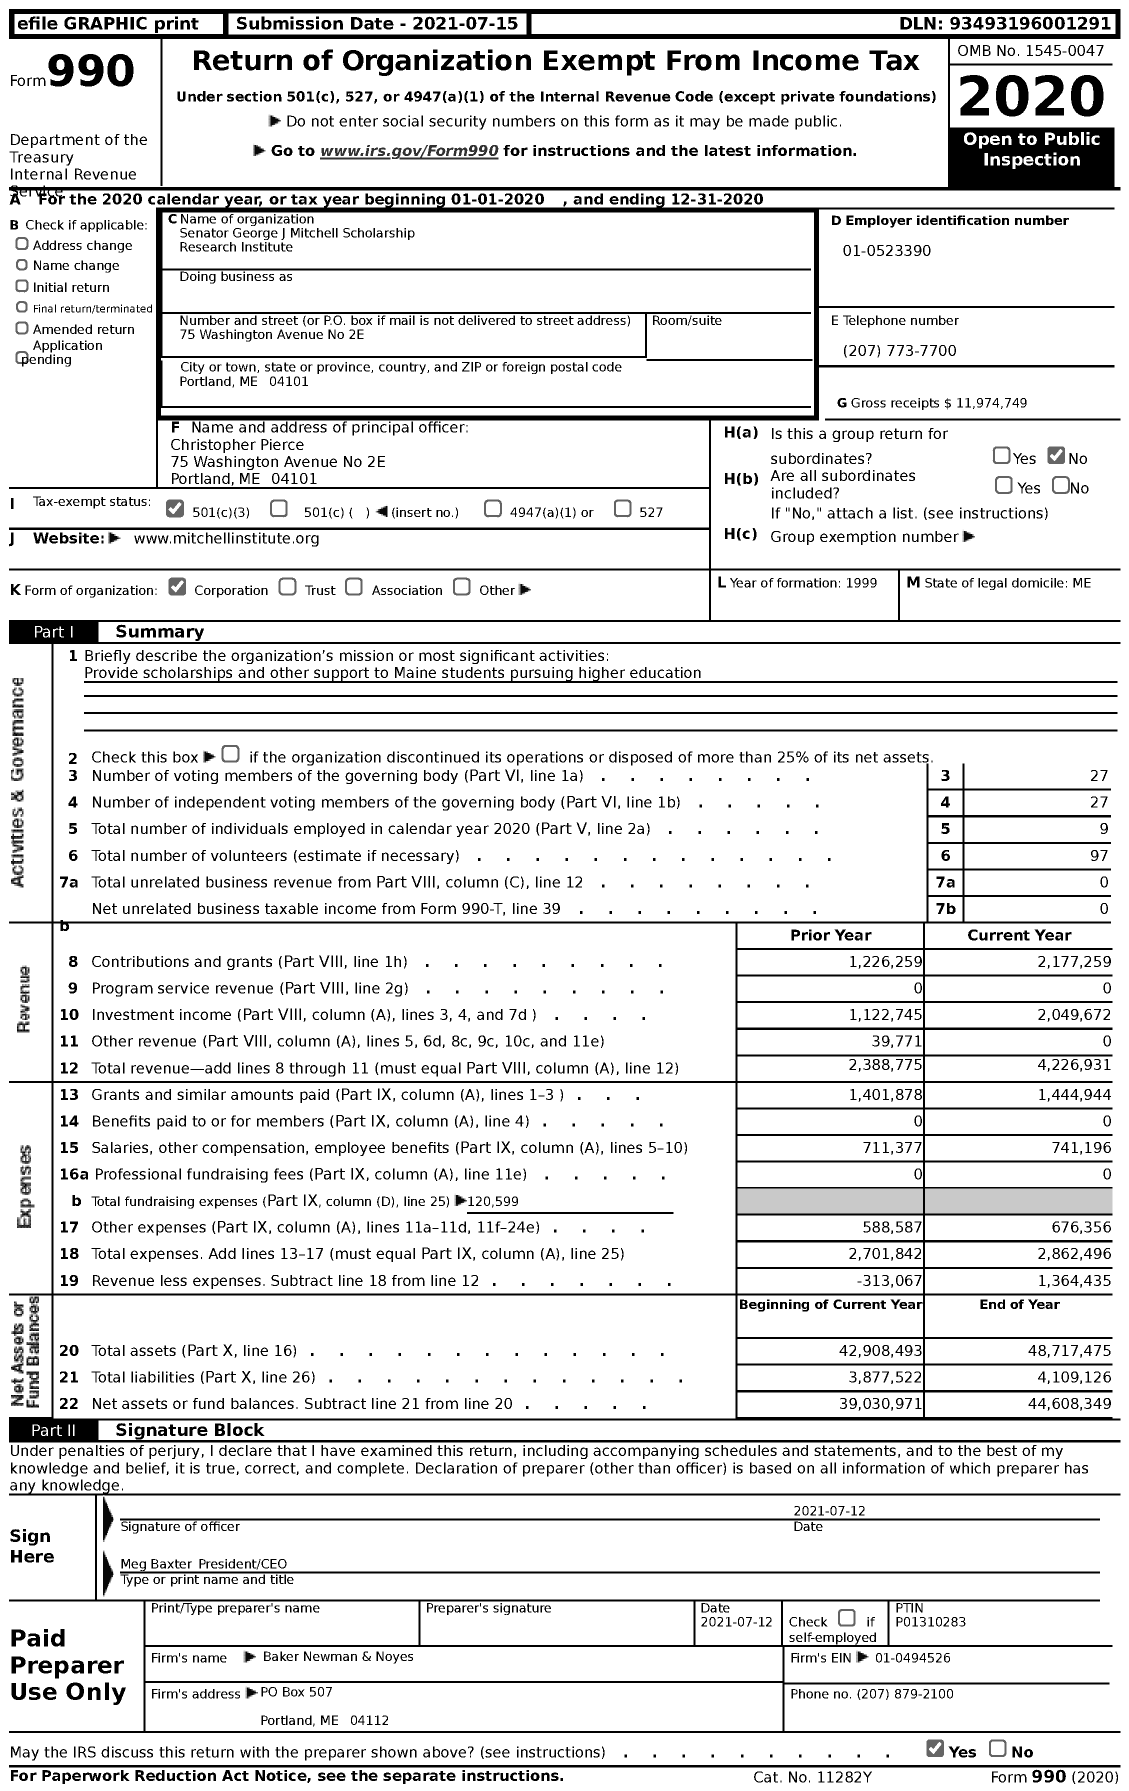 Image of first page of 2020 Form 990 for Senator George J Mitchell Scholarship Research Institute